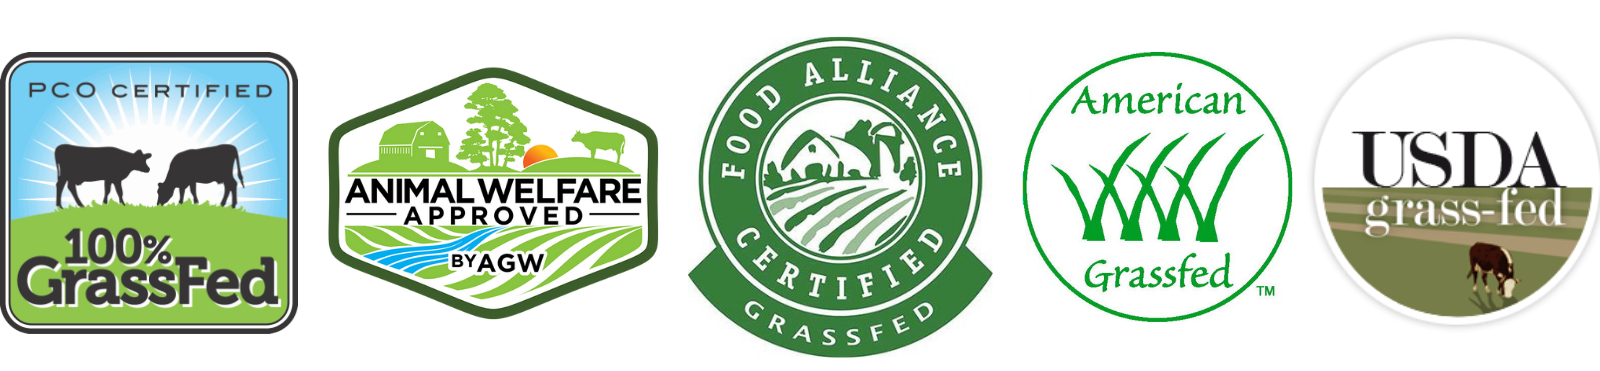 Labels: PCO Certified 100% Grassfed, Animal Welfare Approved by AGW, Food Alliance Certified Grassfed, American Grassfed, USDA Grassfed